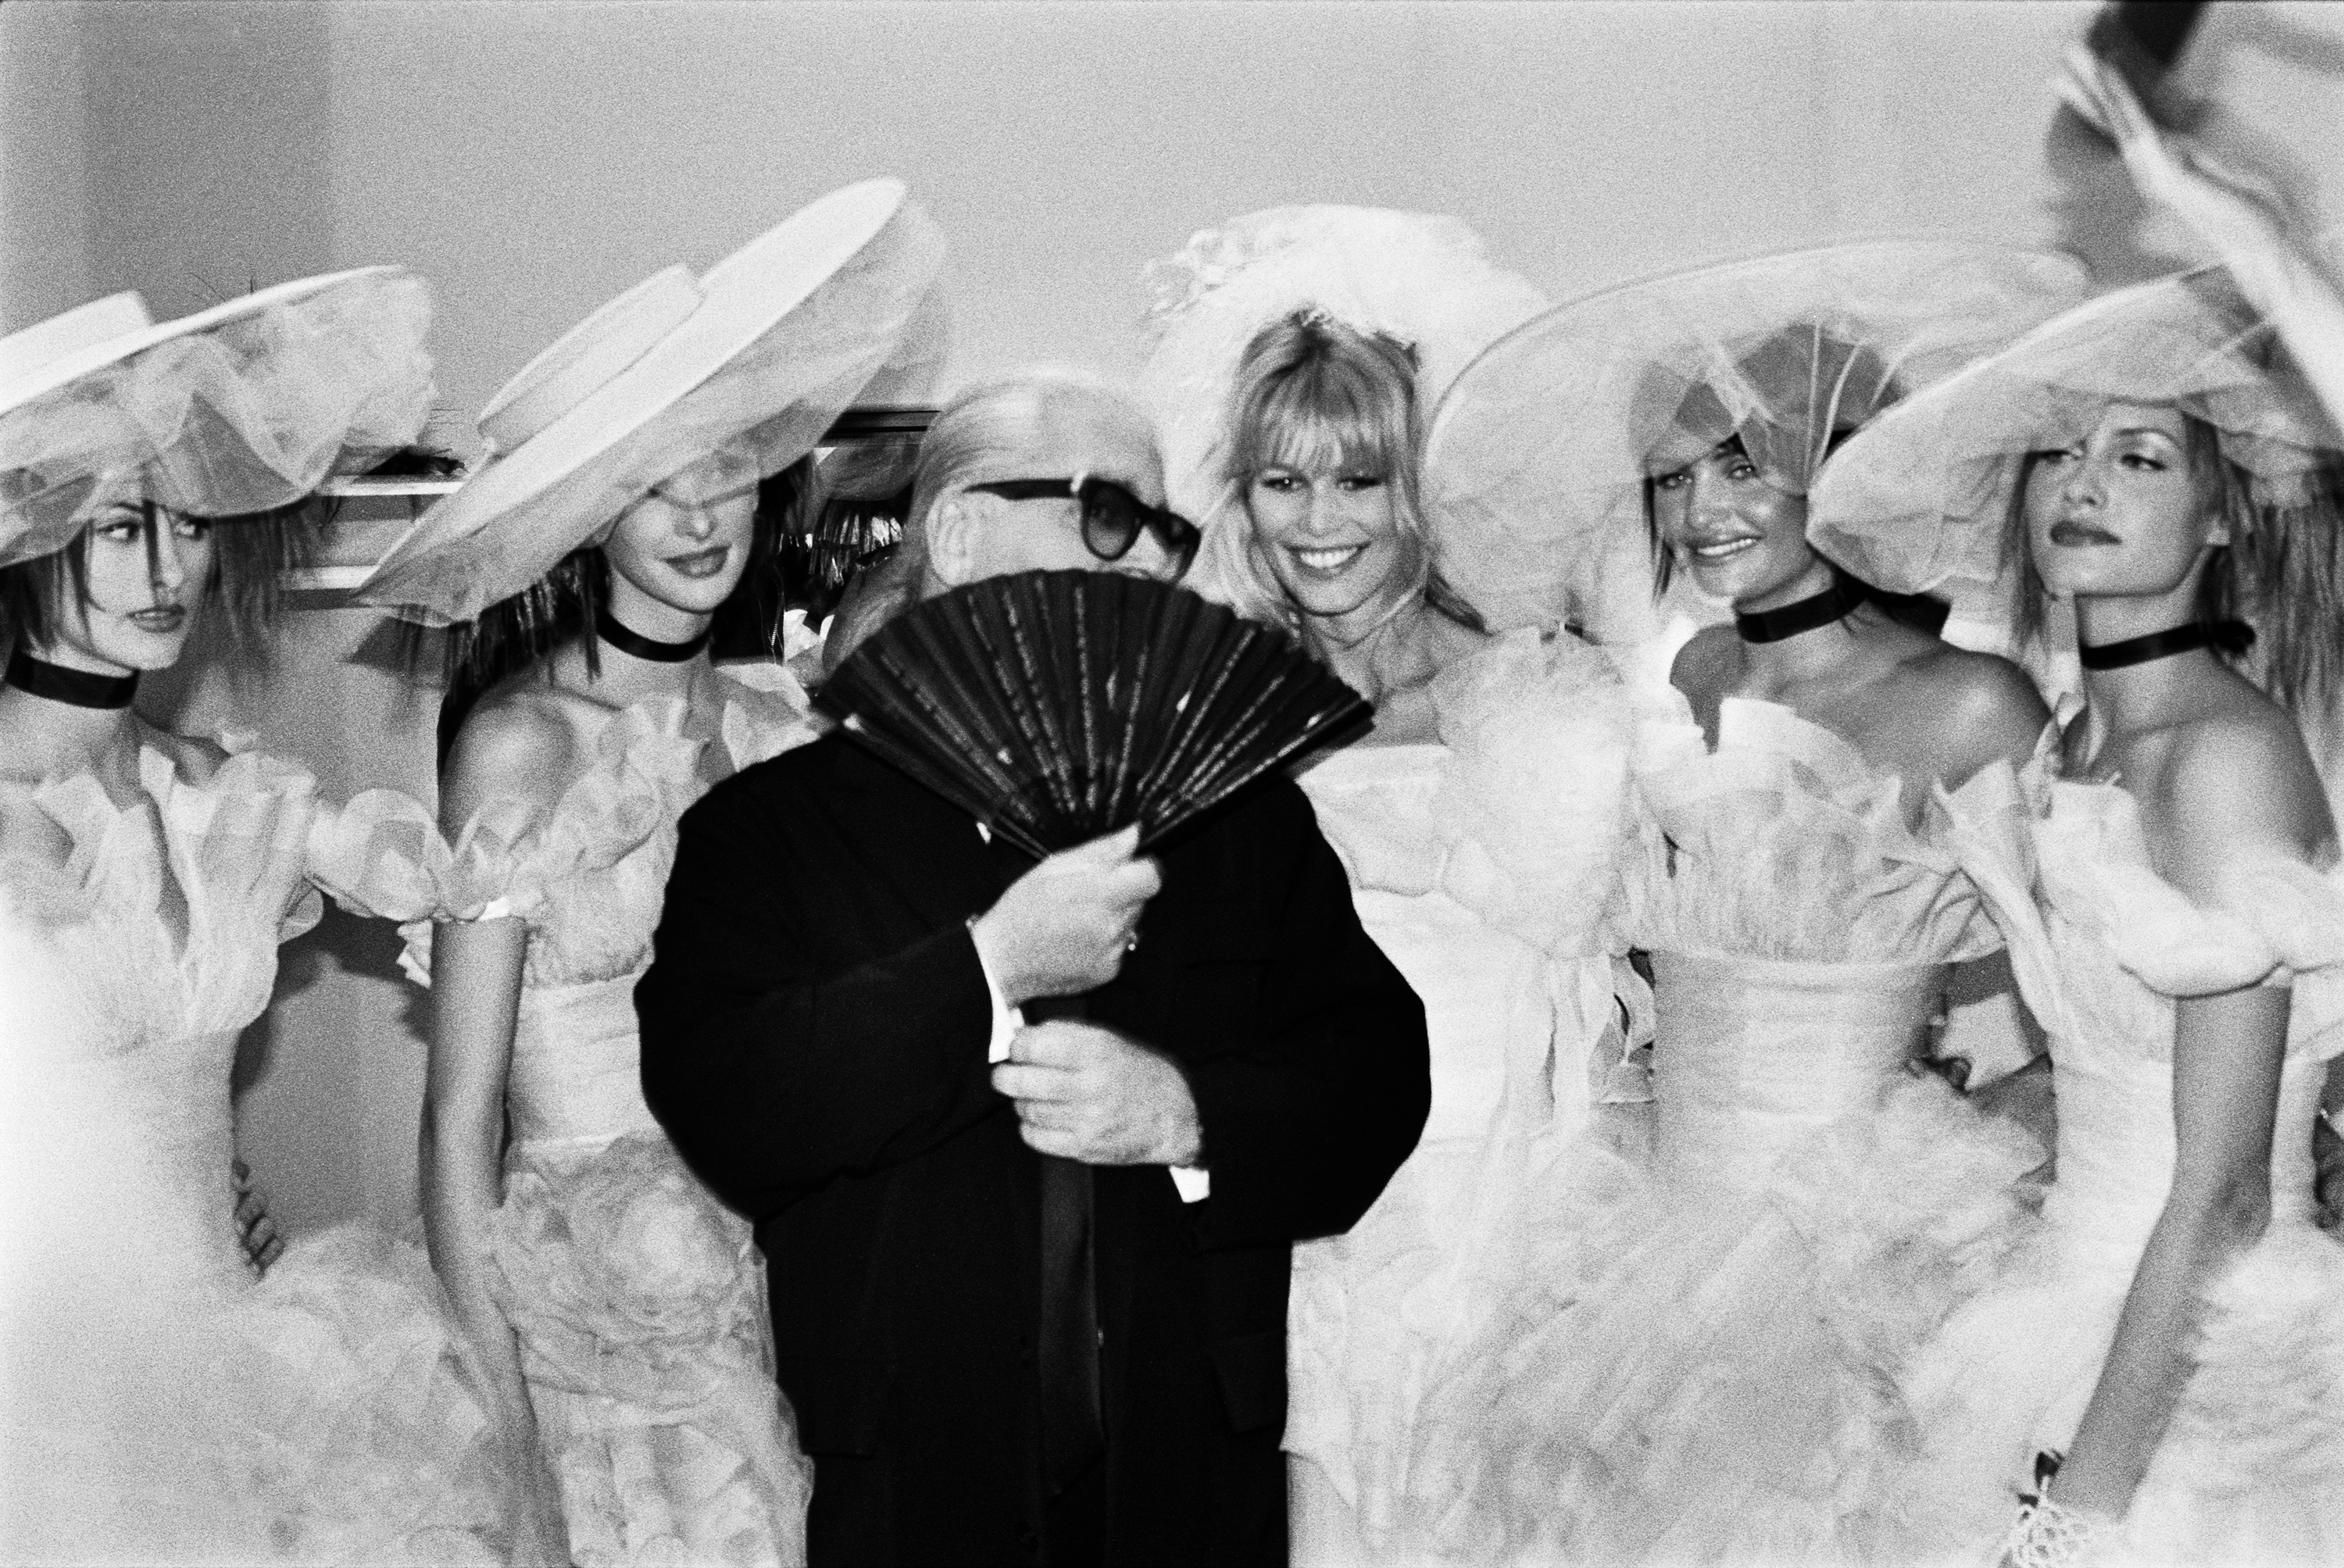 claudia schiffer and helena christensen with karl lagerfeld in paris by mario testino 1994